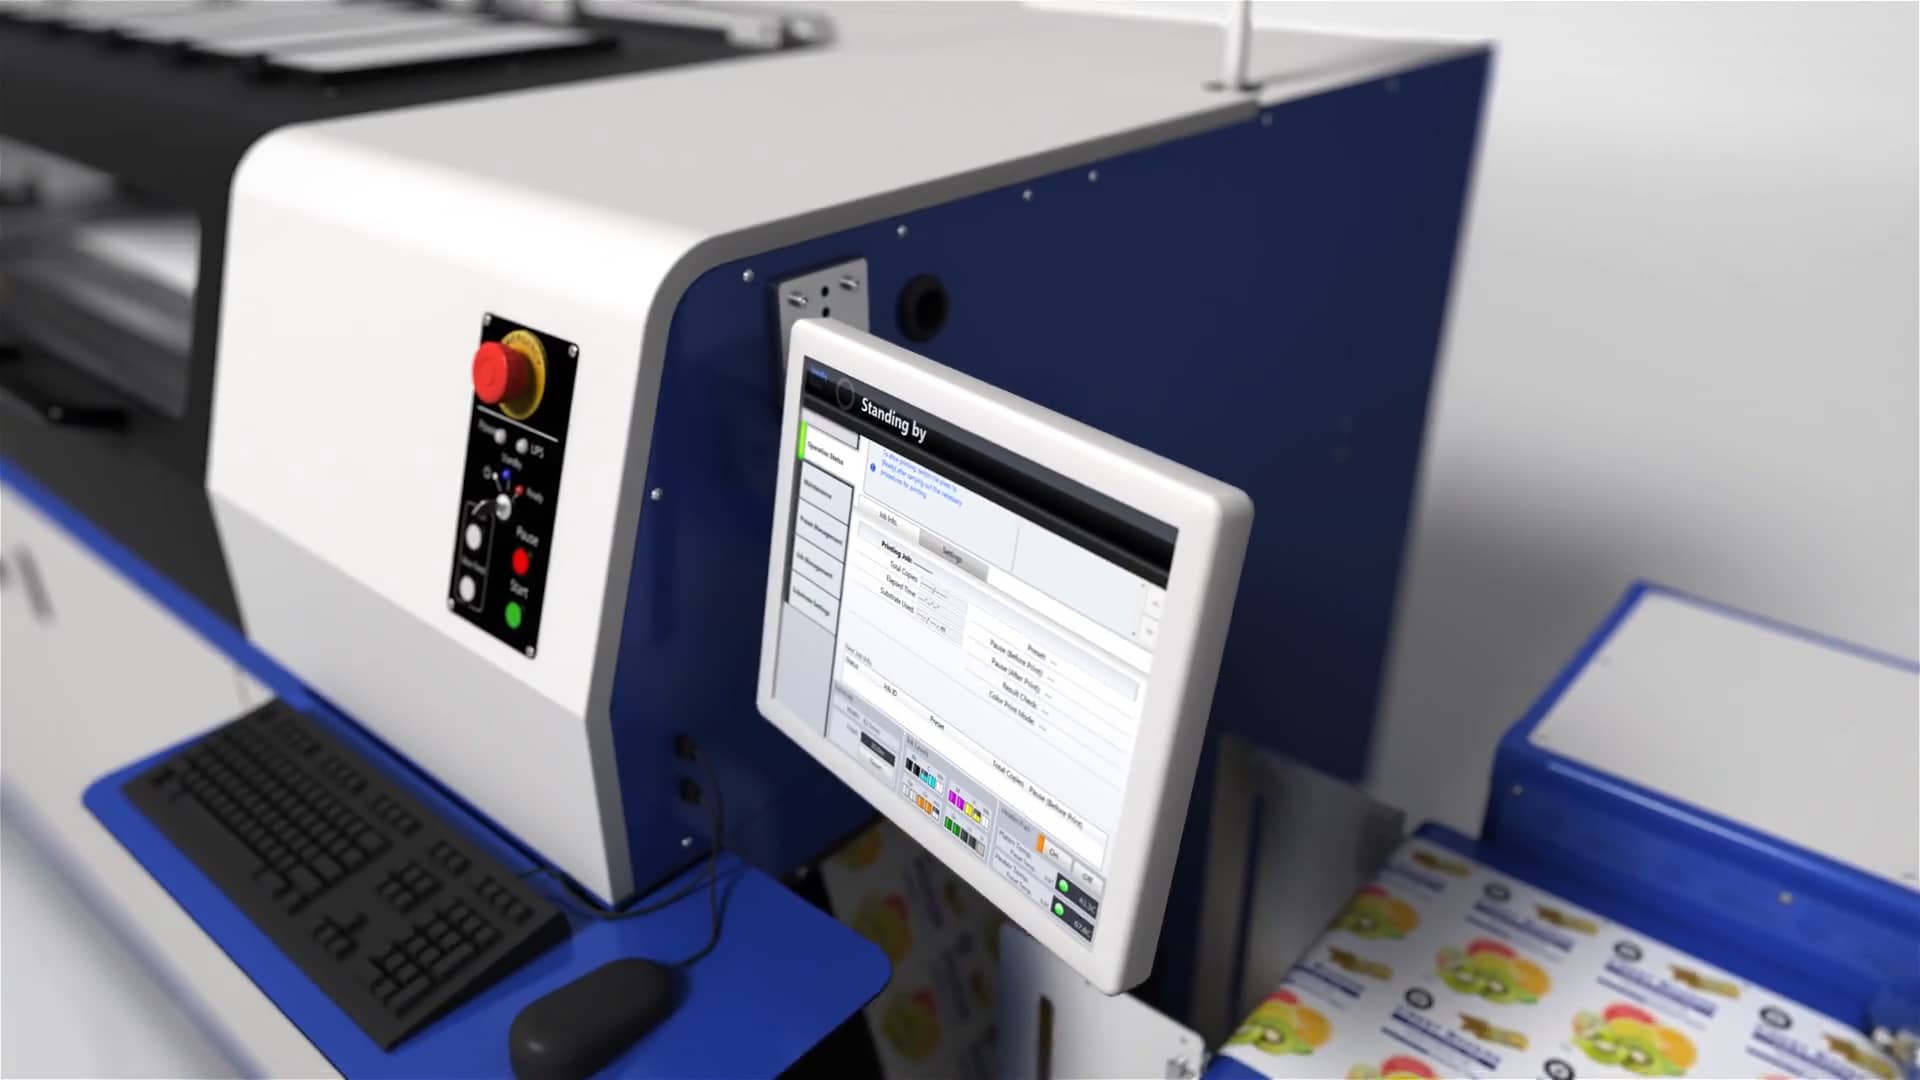 Epson Surepress L 4533aw Experience The Label And Packaging Digital Press On Vimeo 8947